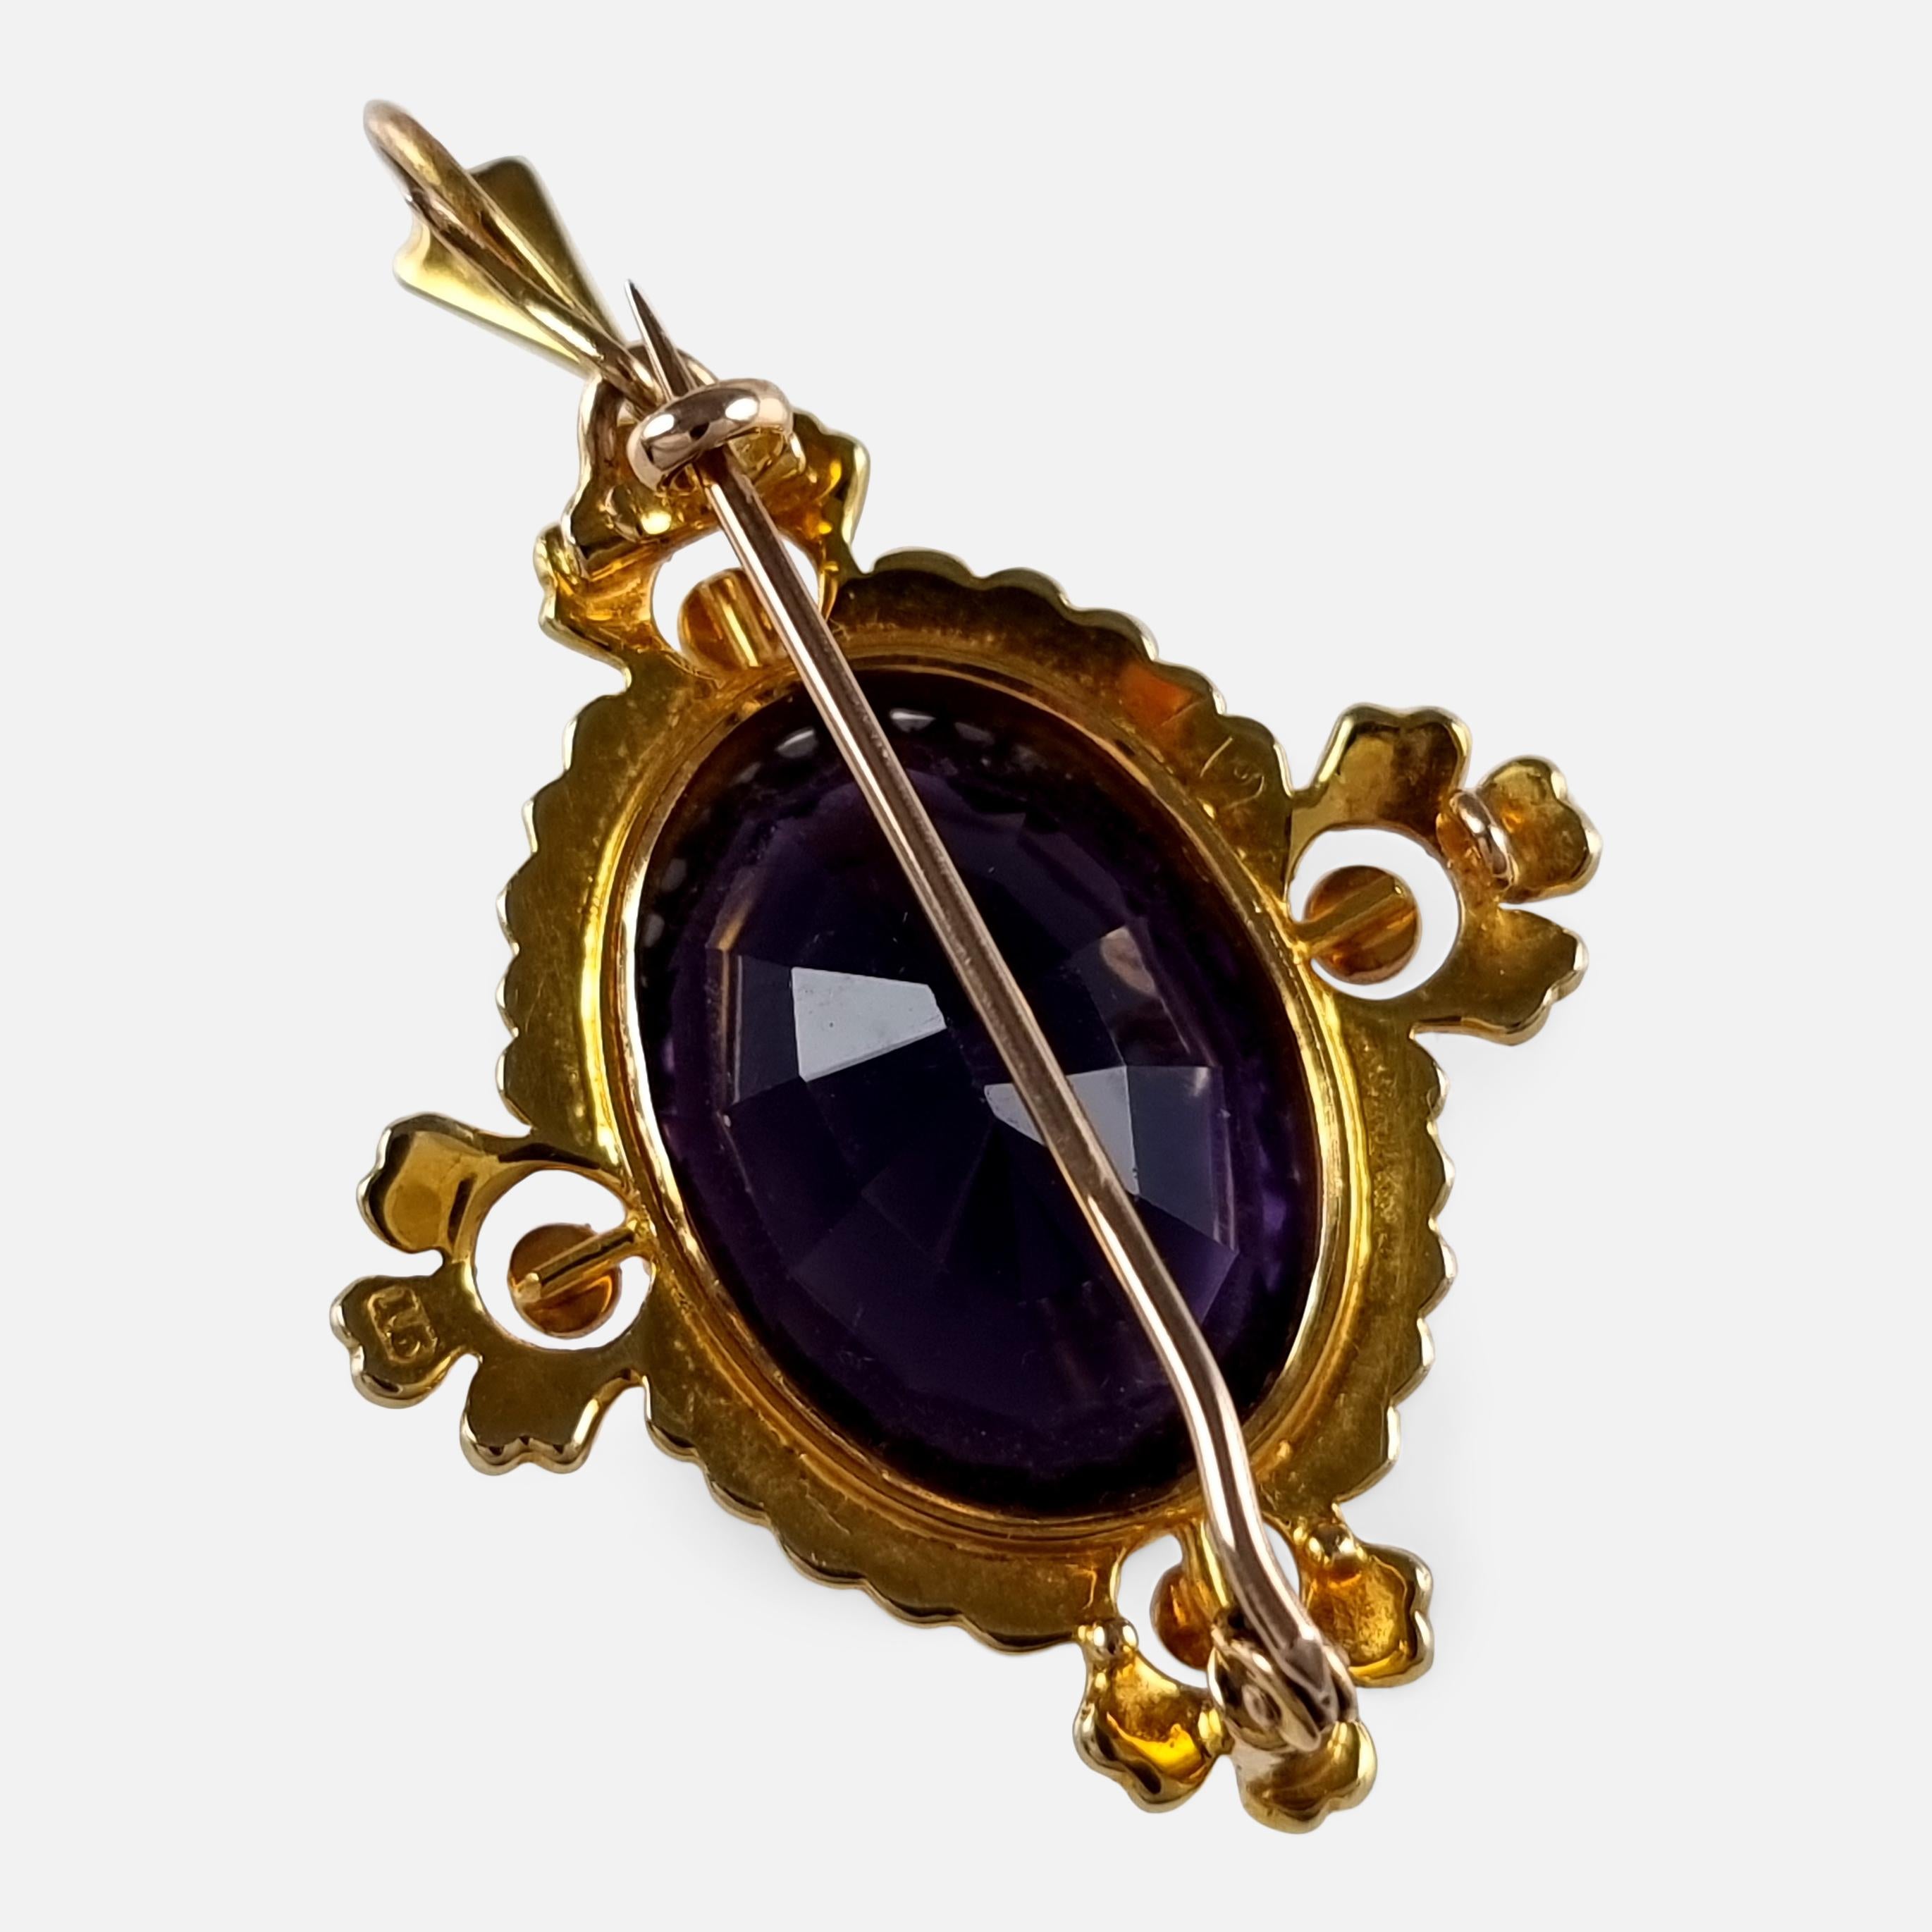 Edwardian 15ct Gold Amethyst and Seed Pearl Pendant Brooch 2